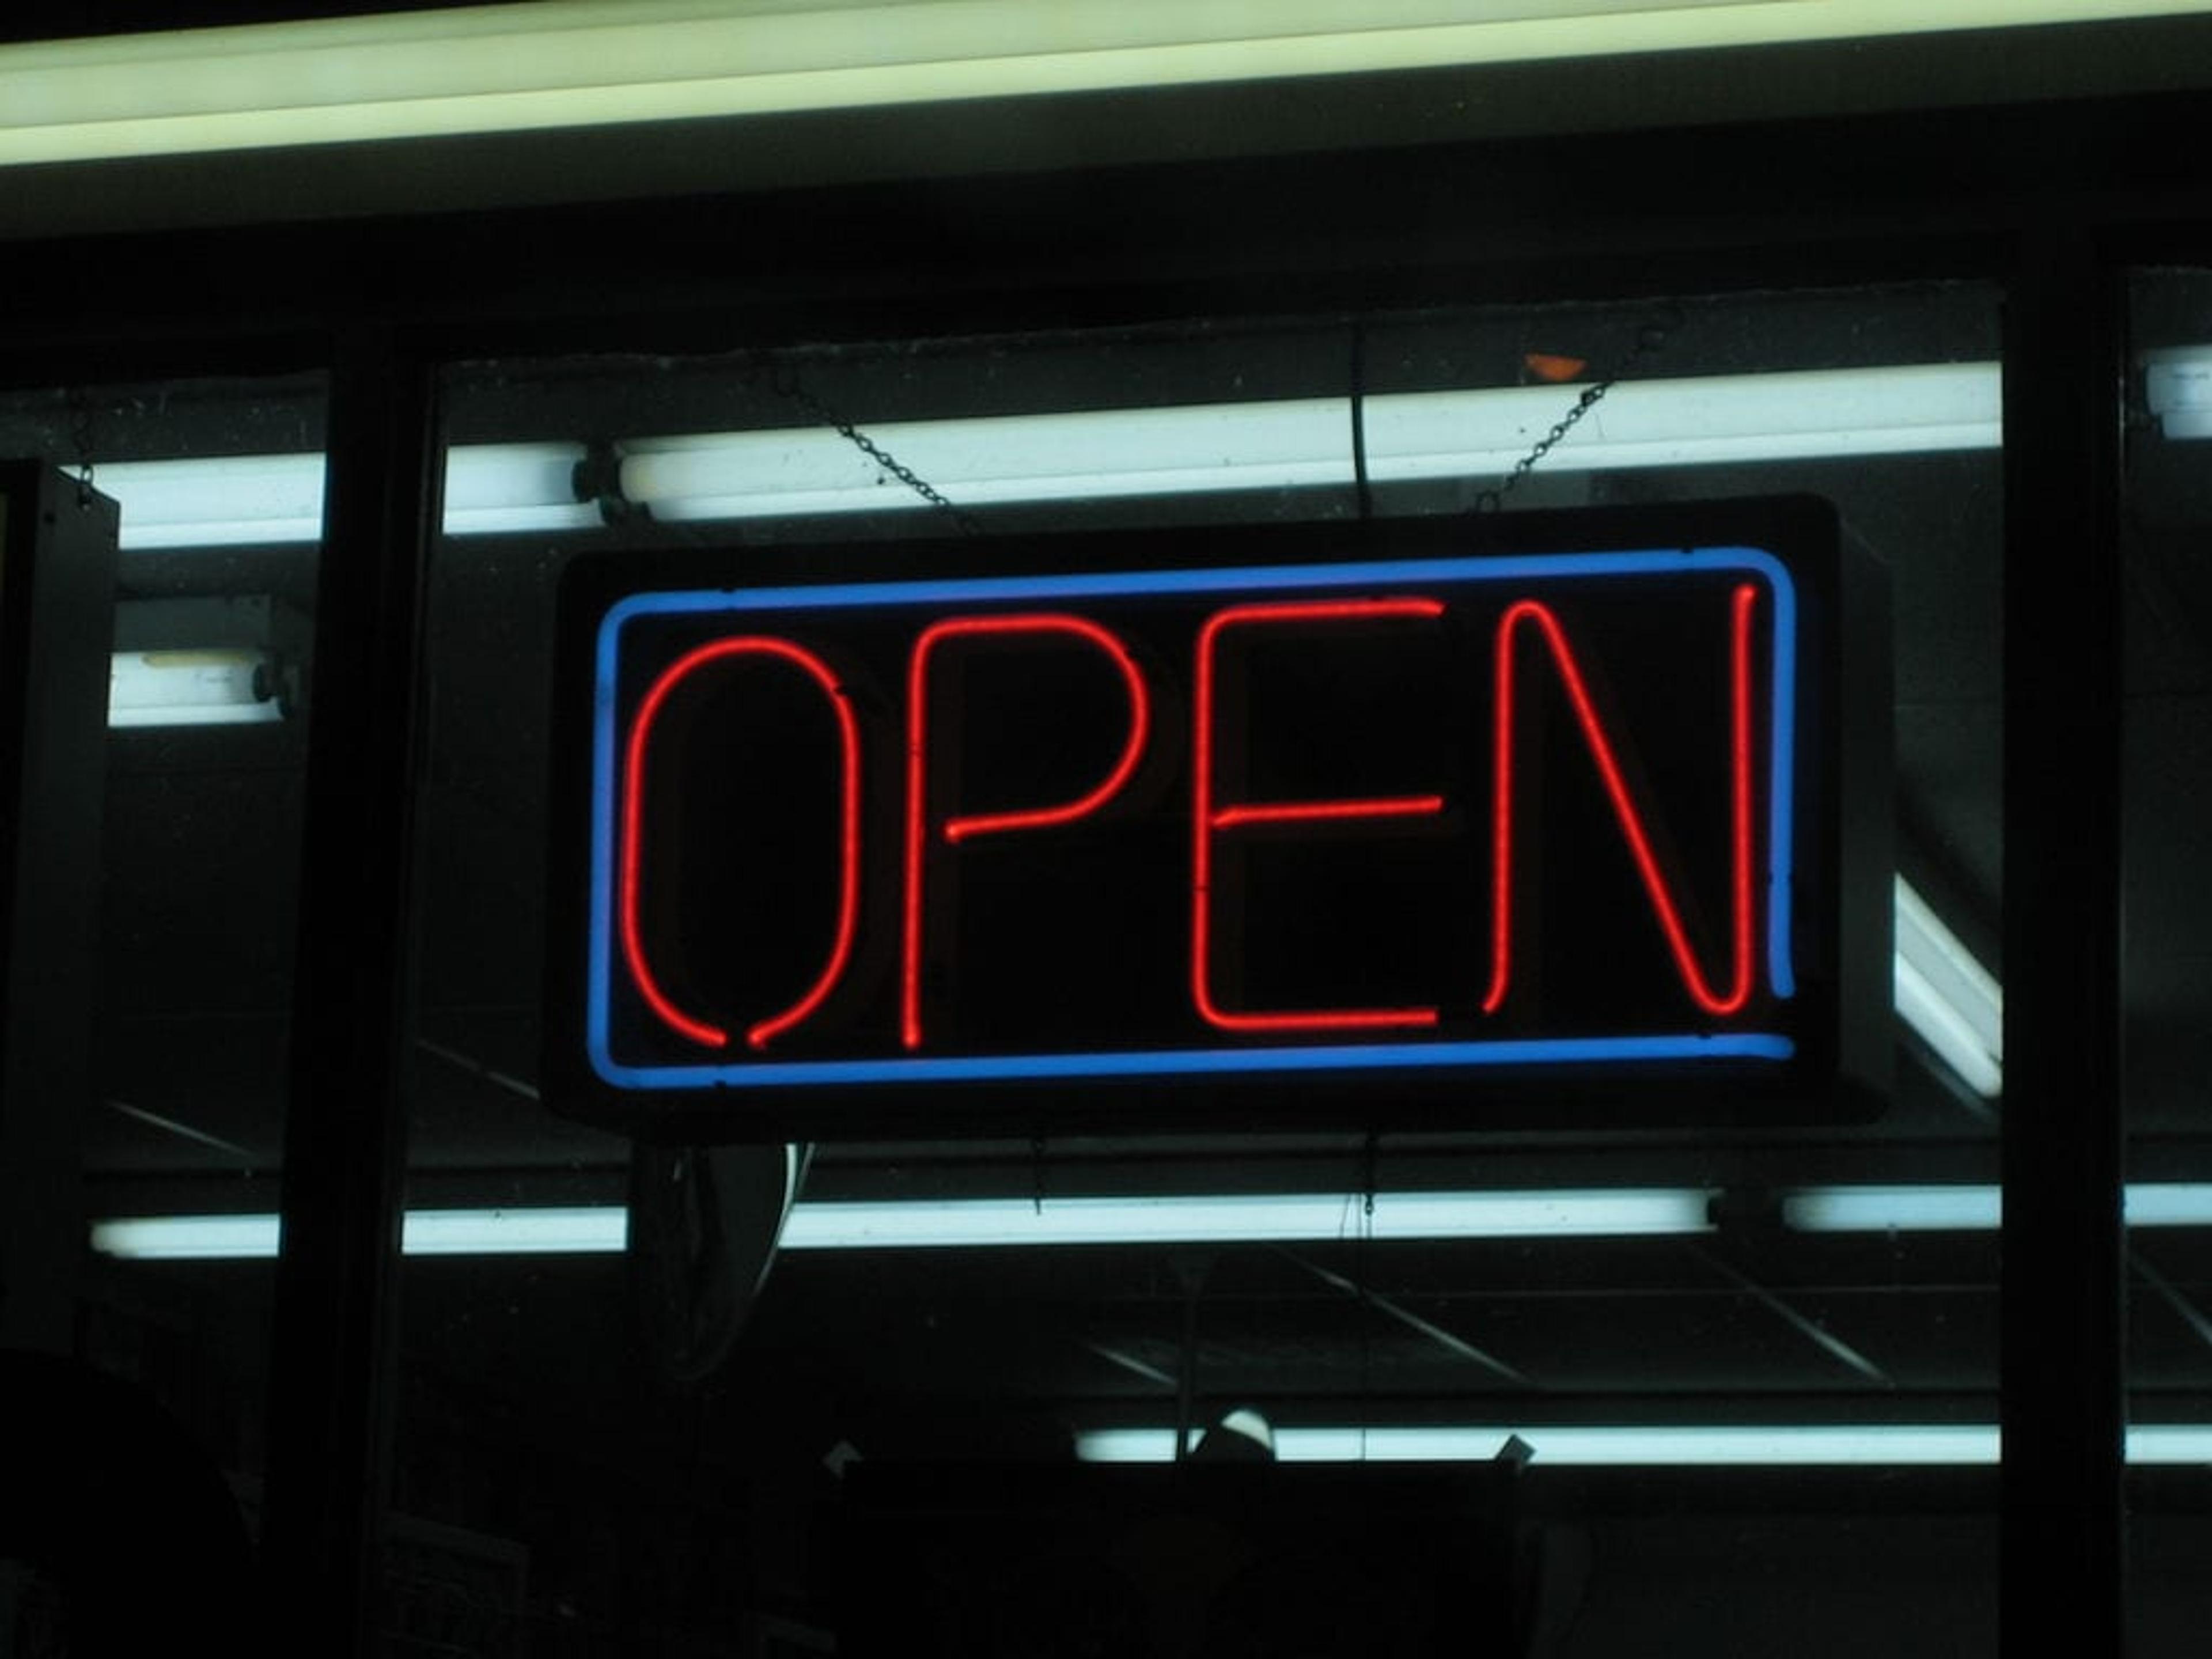 Image of a neon "open" sign